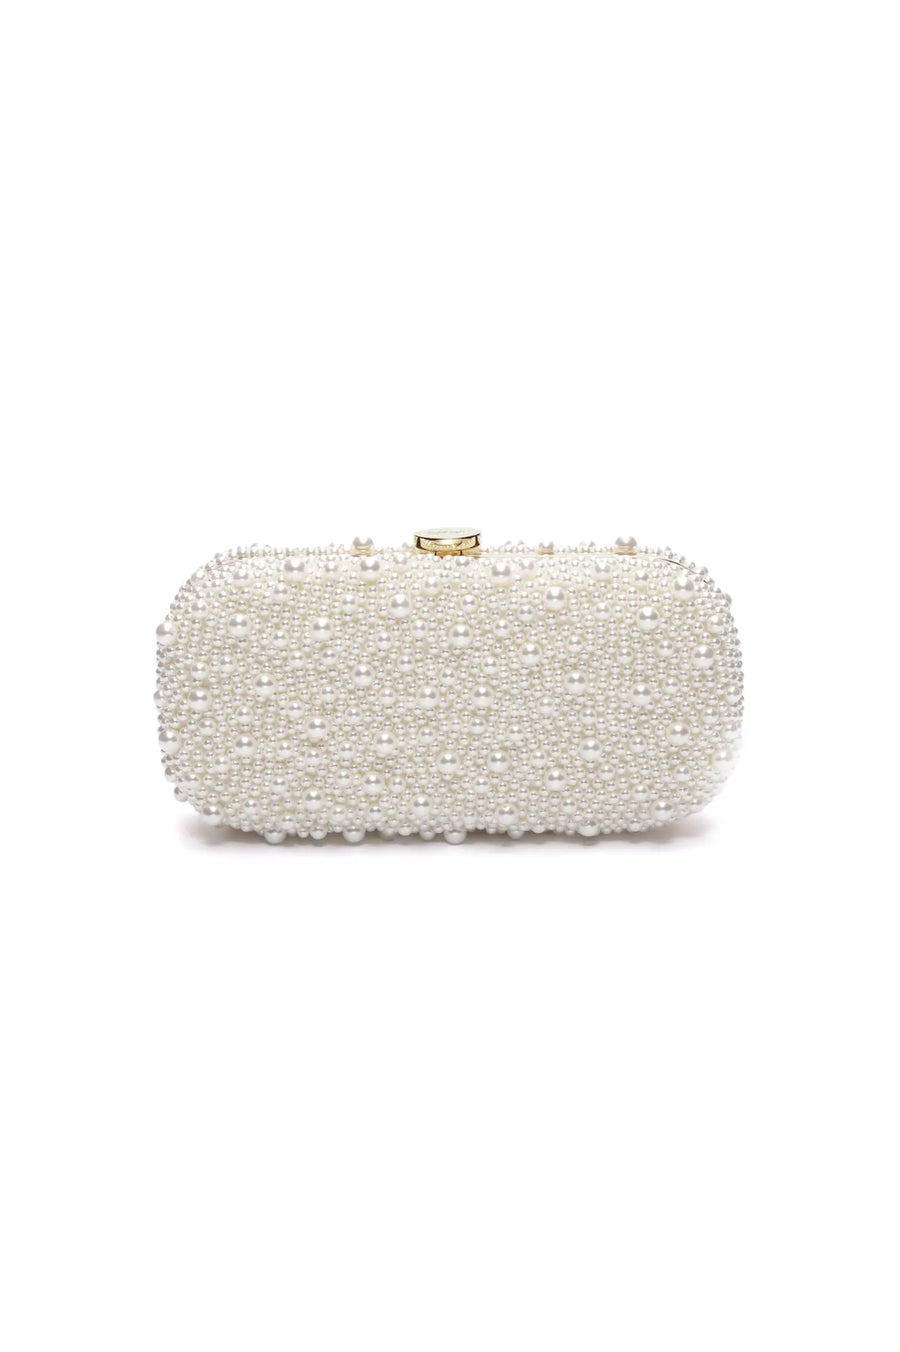 True Love Pearl Clutch from The Bella Rosa Collection against a white background.